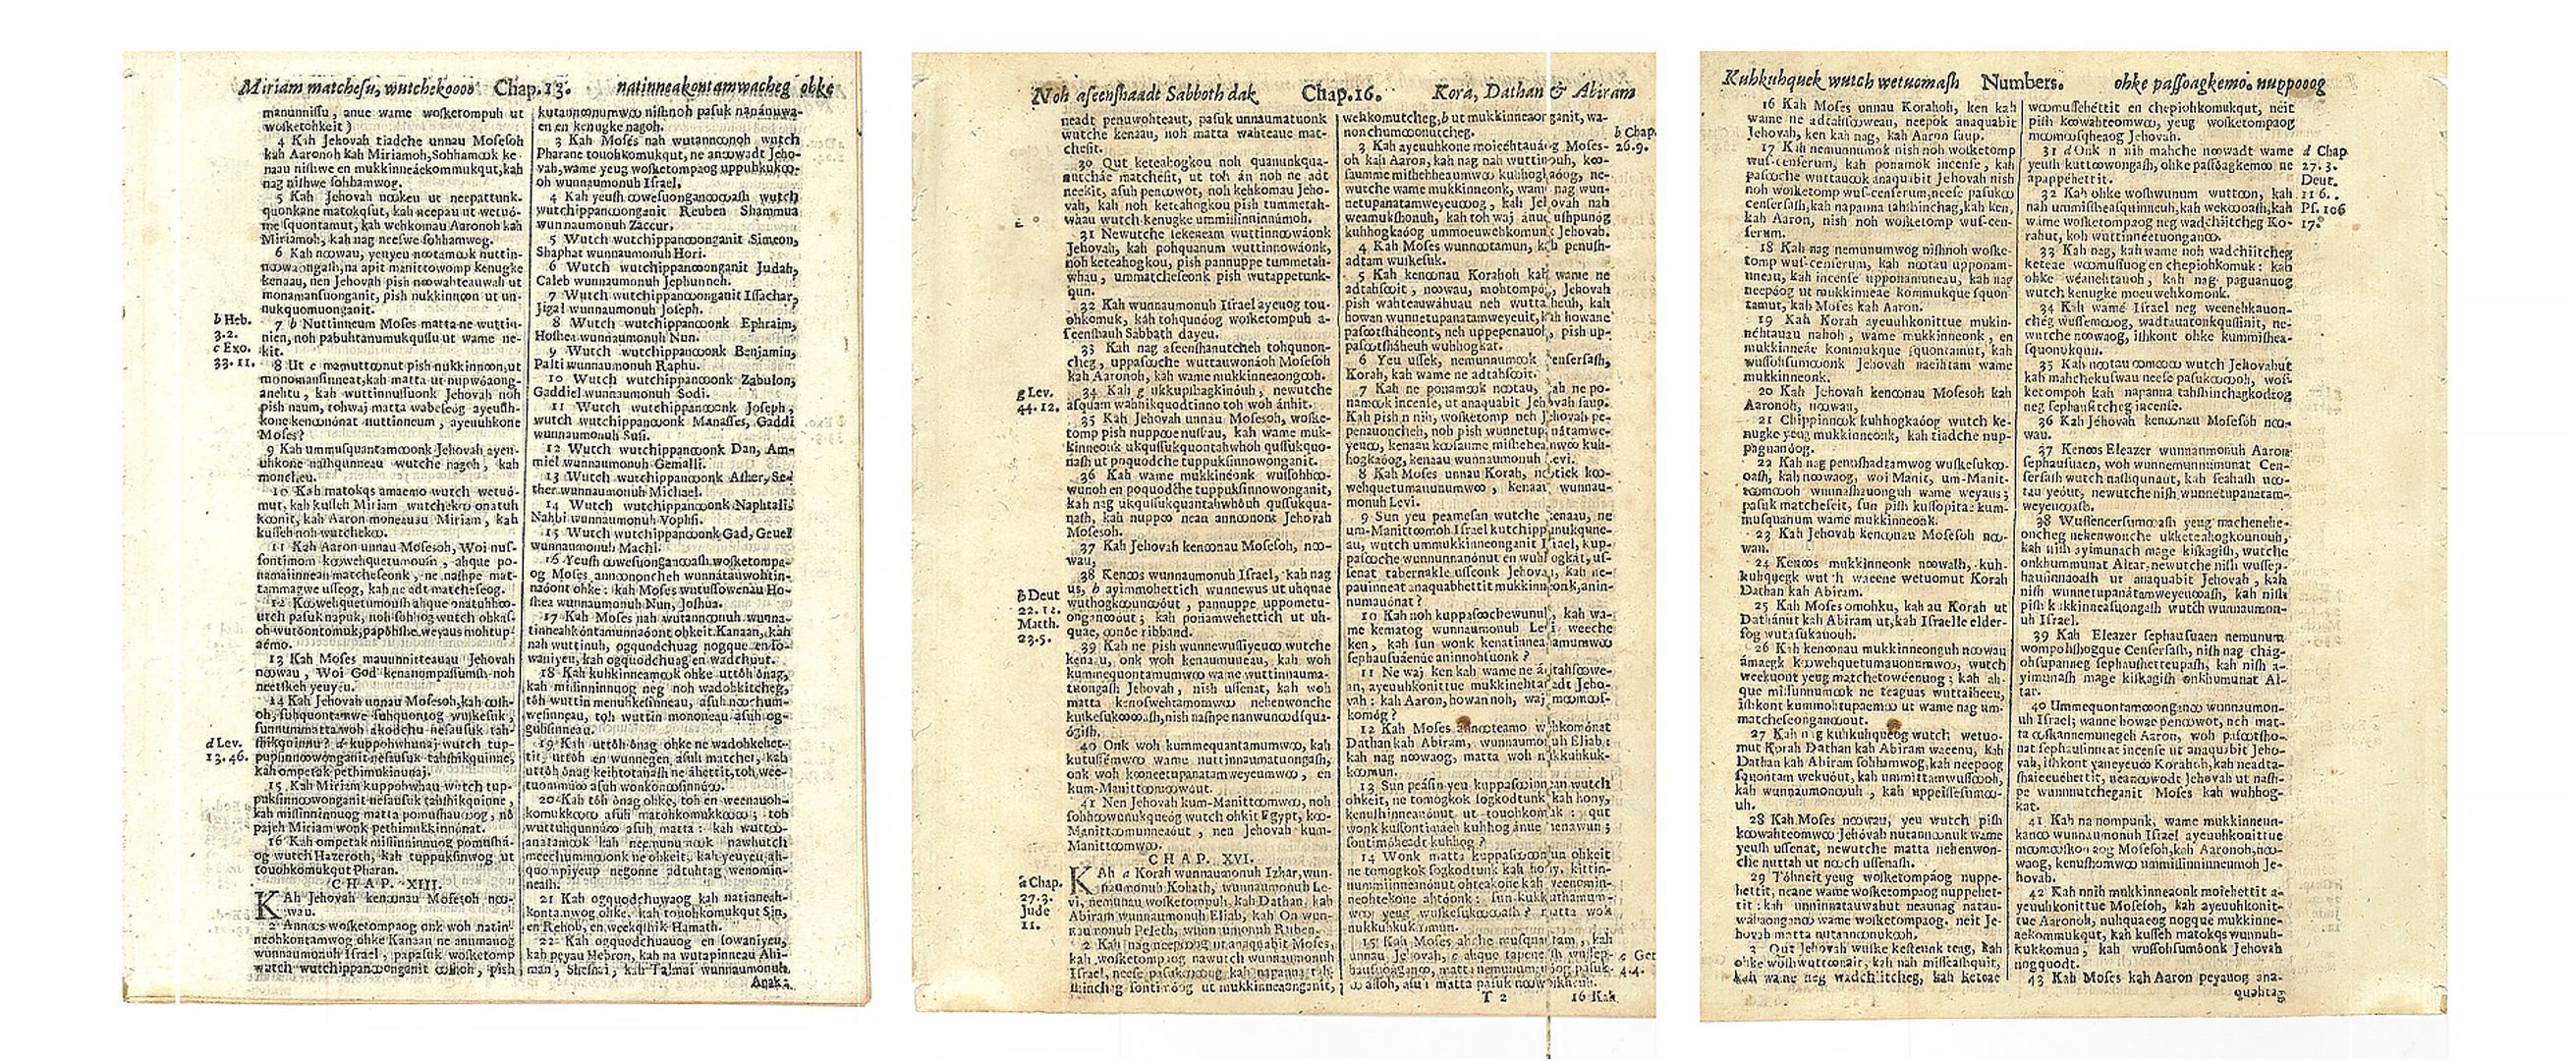 A spread from the archival book "Mamusse Wunneetupanatamwe Up-Biblum God," featuring the first translation of the Bible into a Native American language.